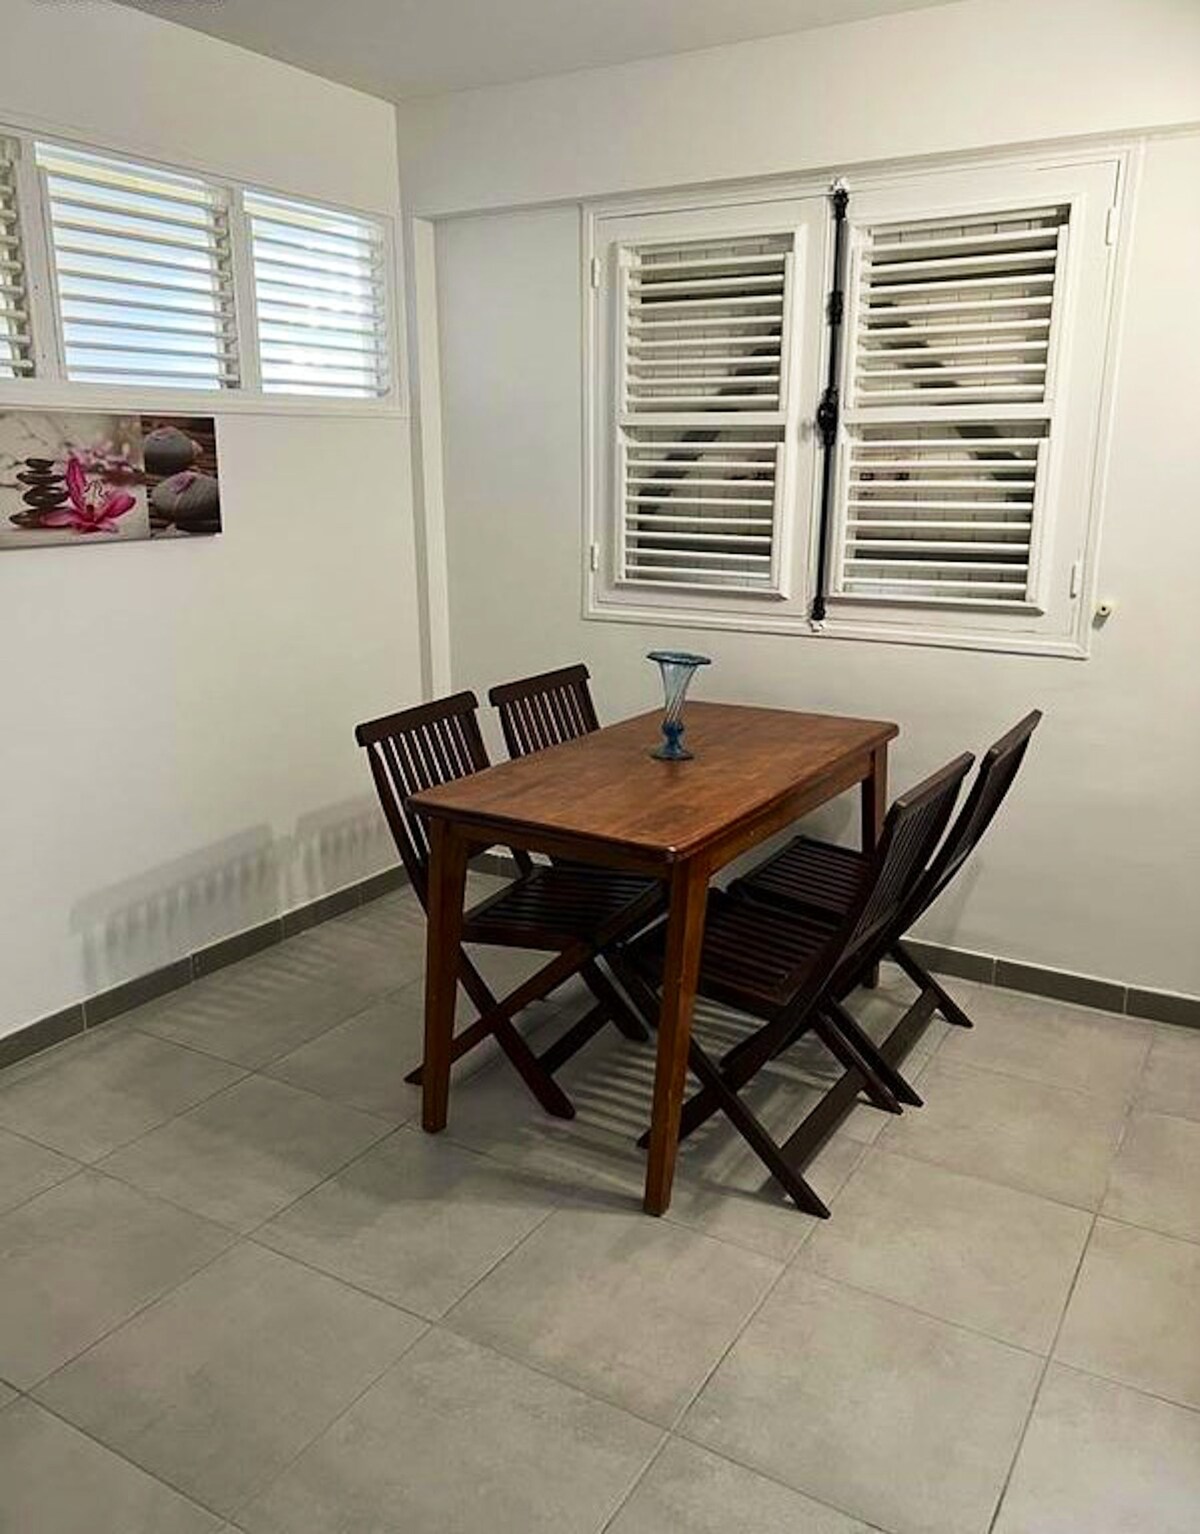 Apartement 3 km away from the beach for 2 ppl.